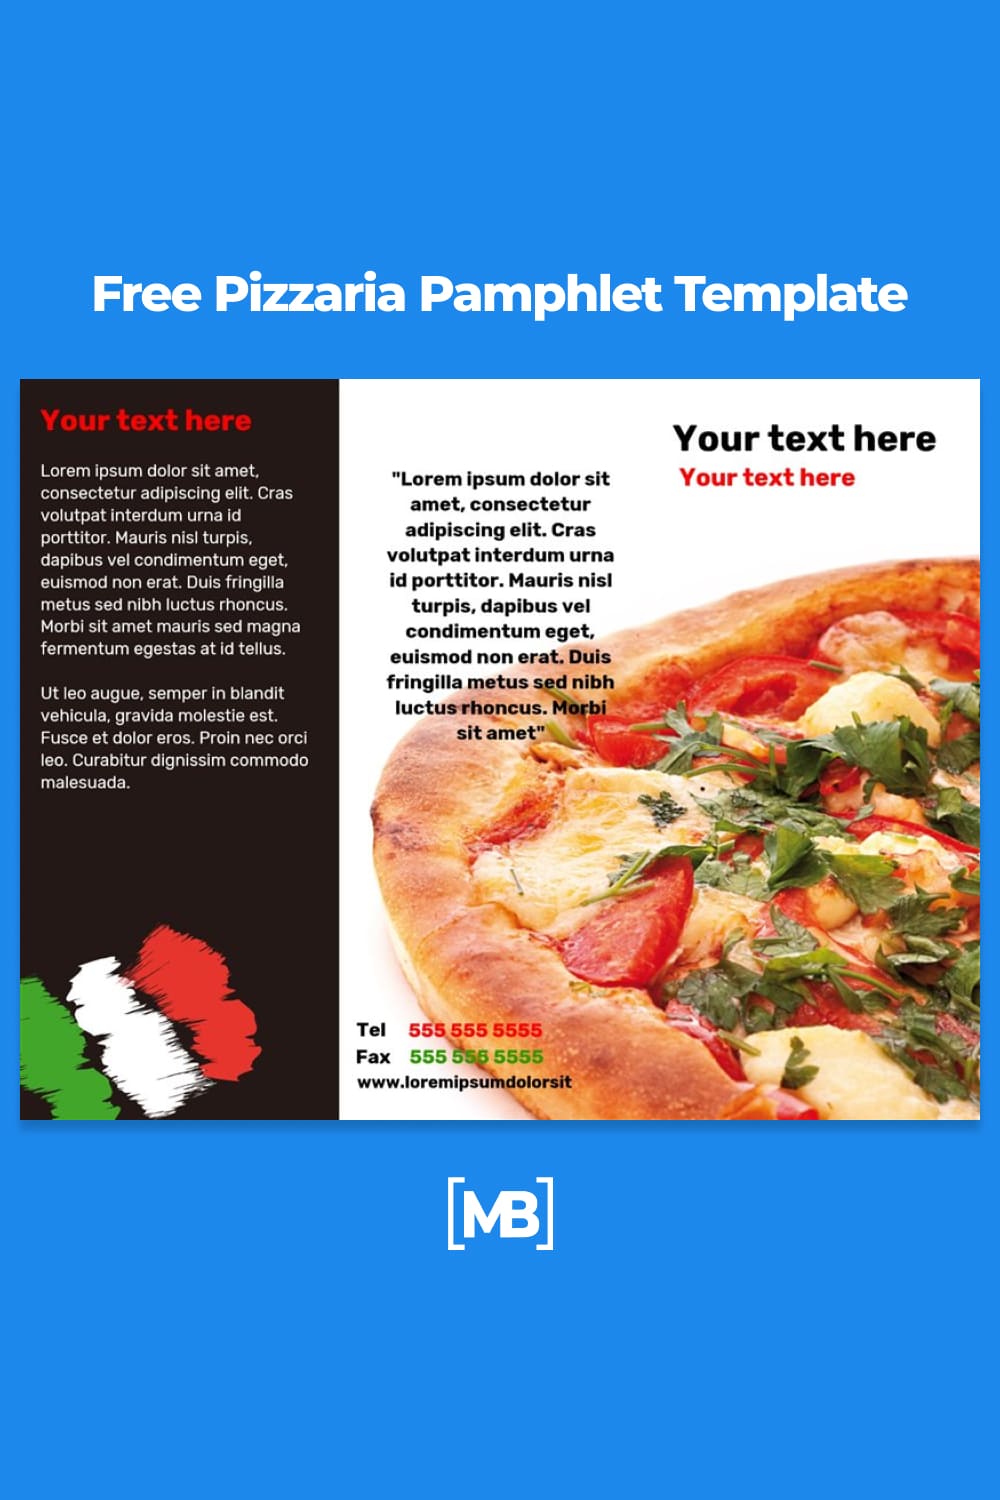 Pizzaria pamphlet template.